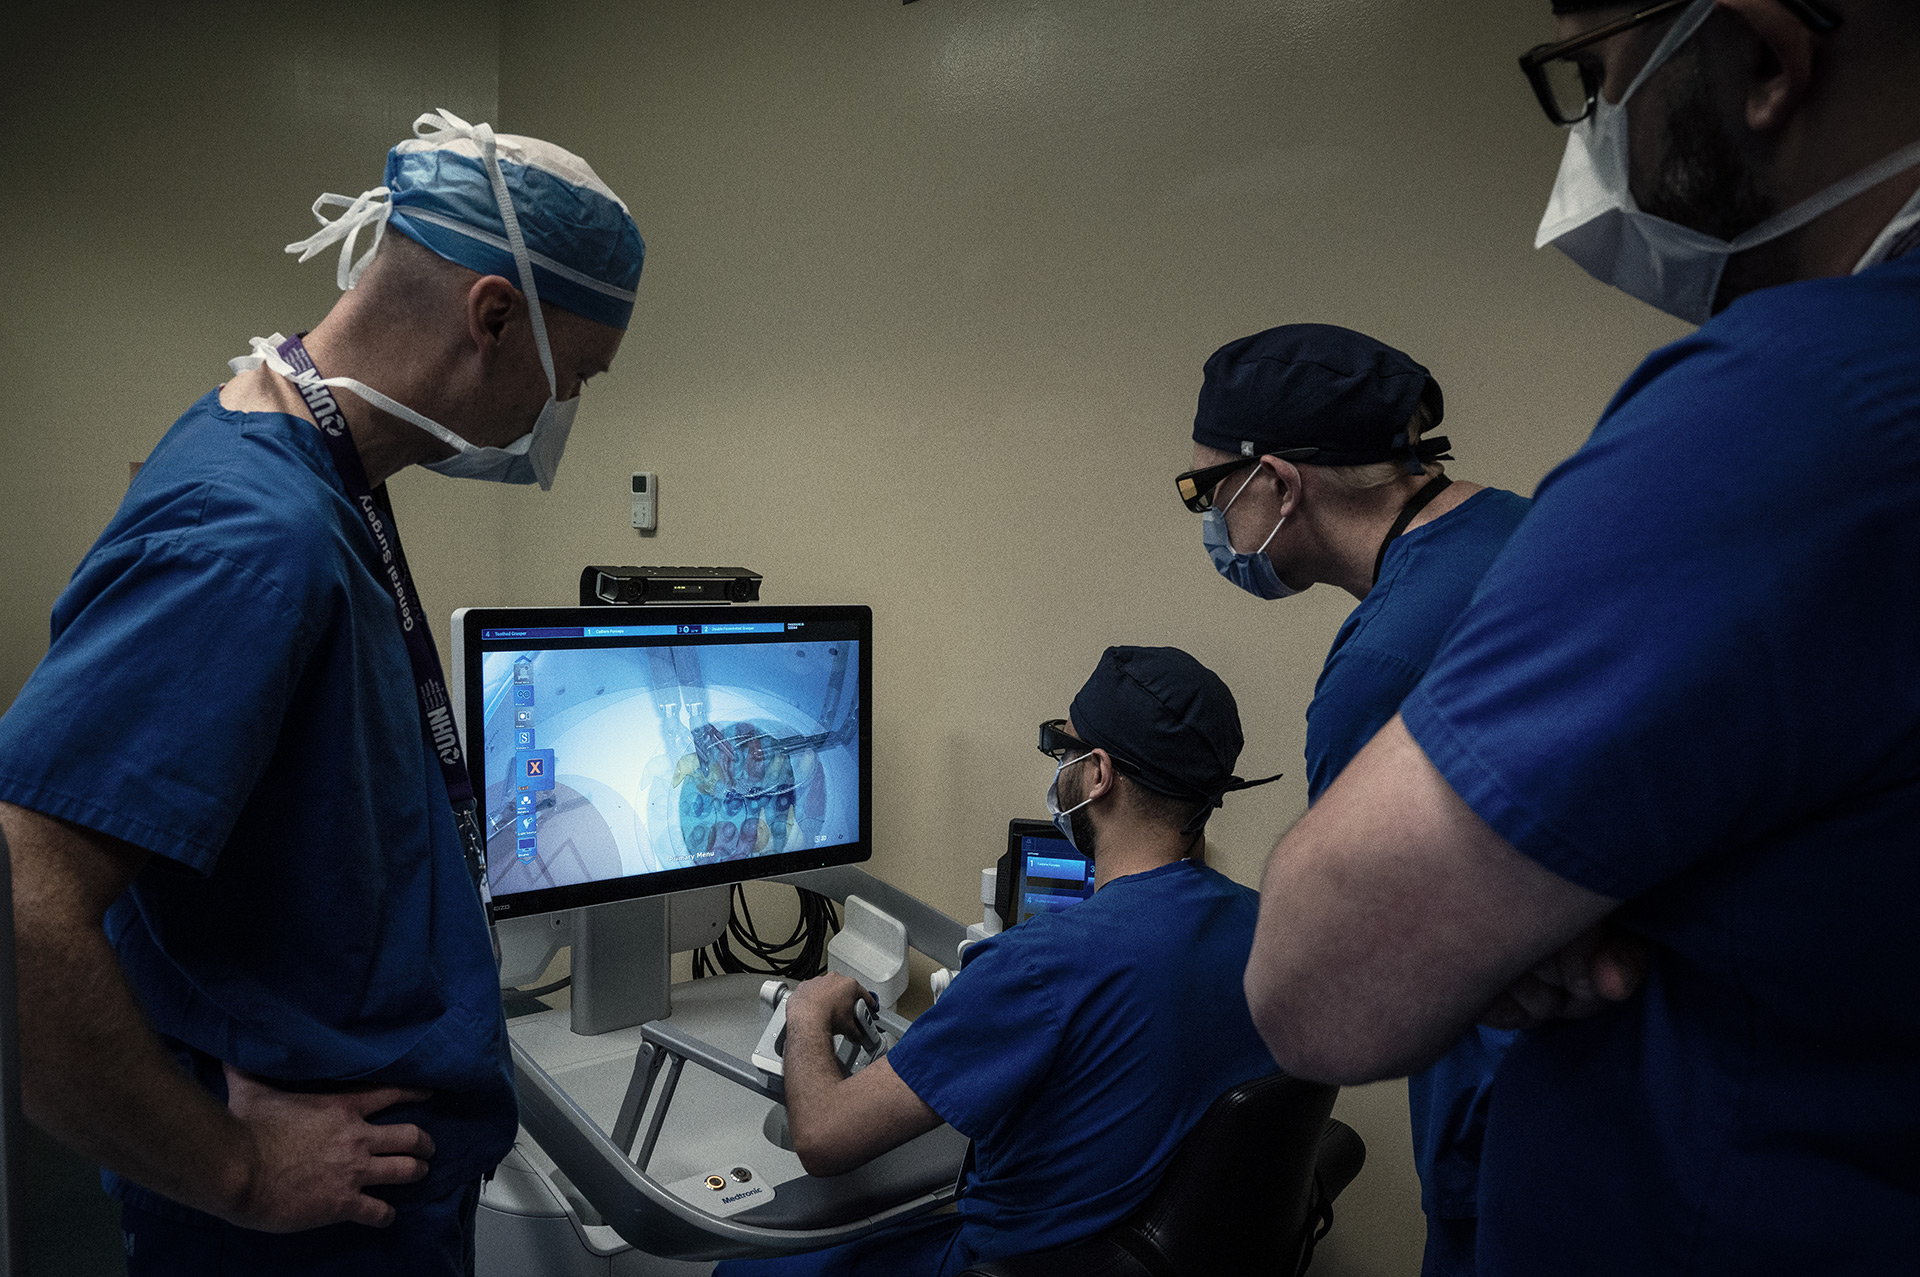 The surgical team learning how to control one of the surgical robots.